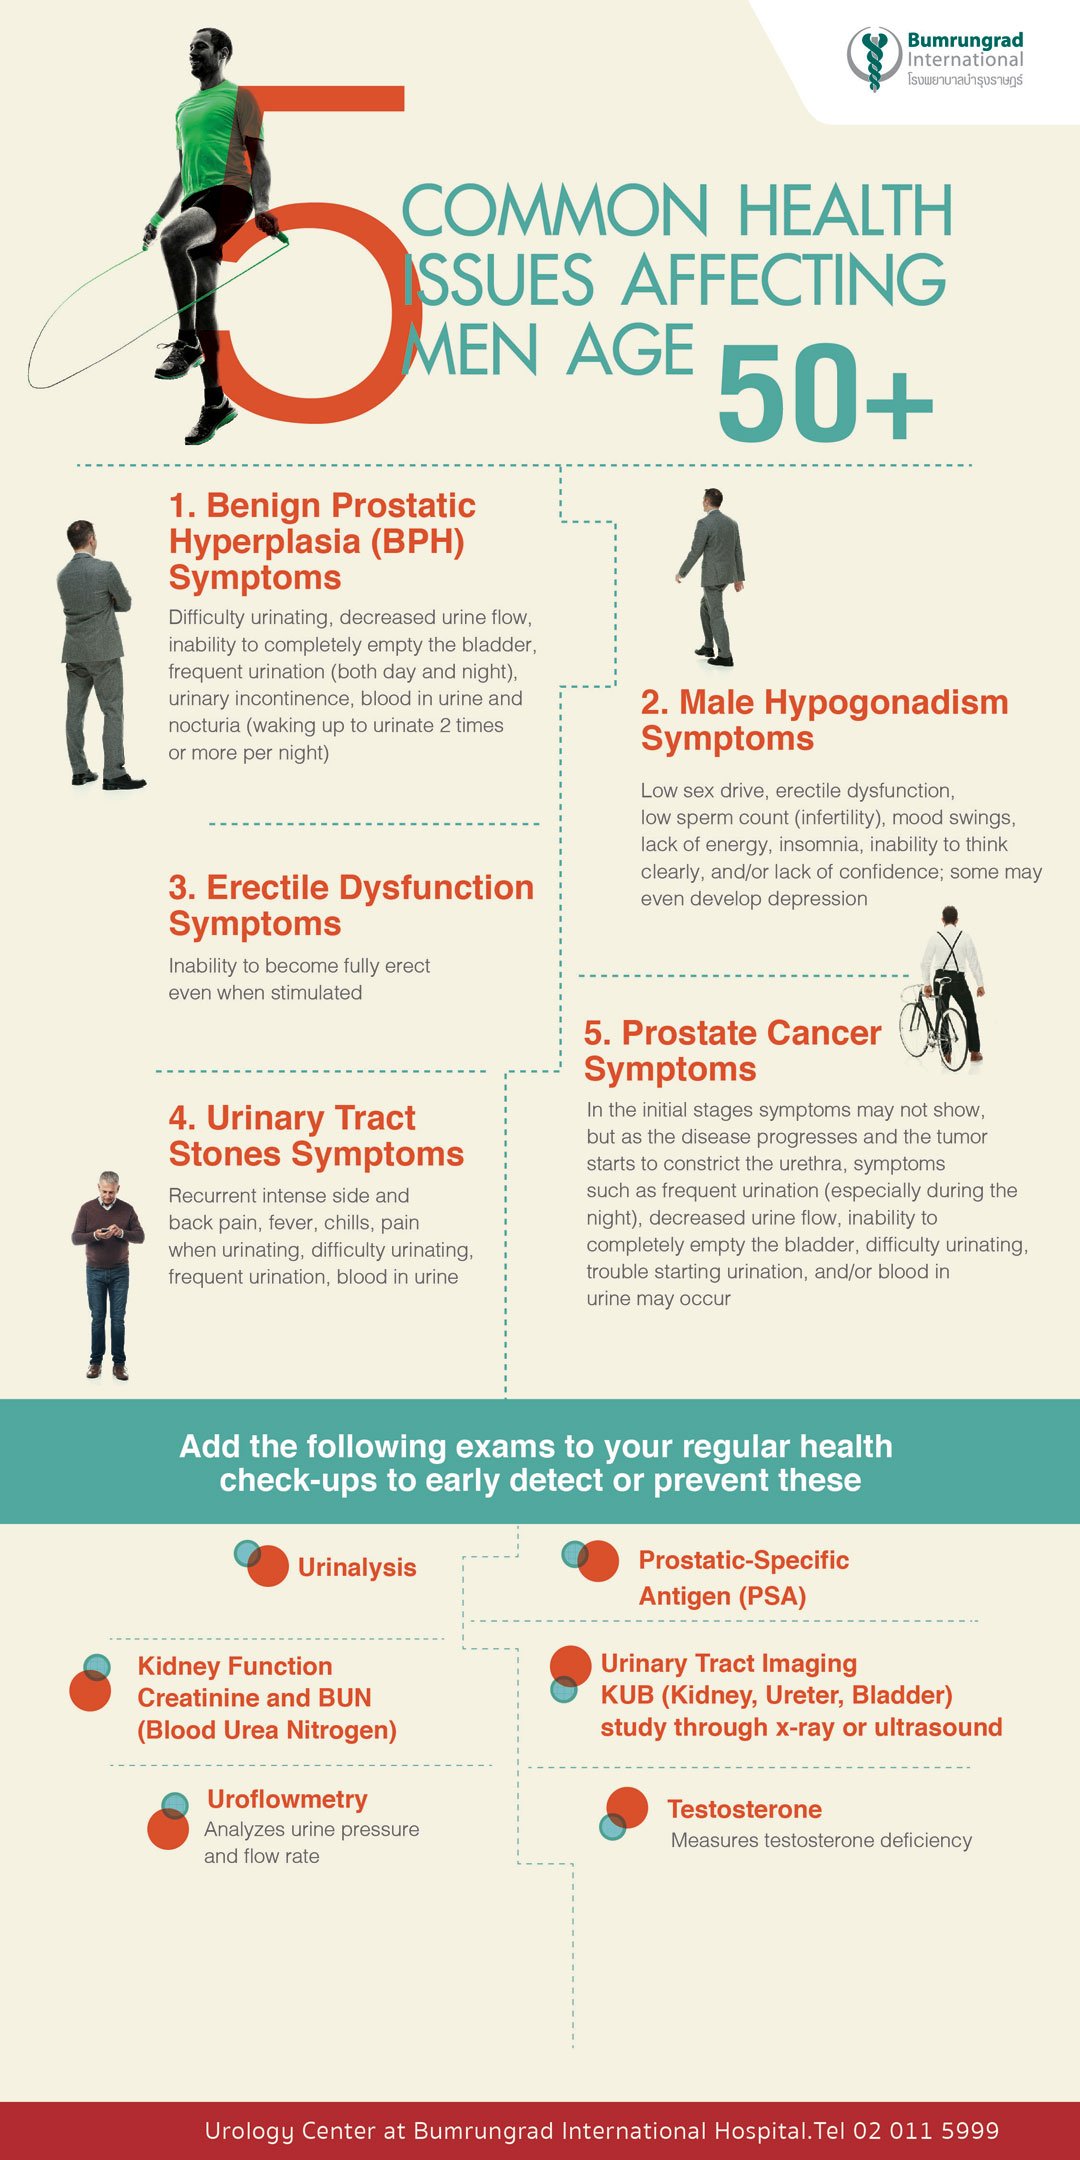 Common Health Issues Affecting Men Age 50+ infographic